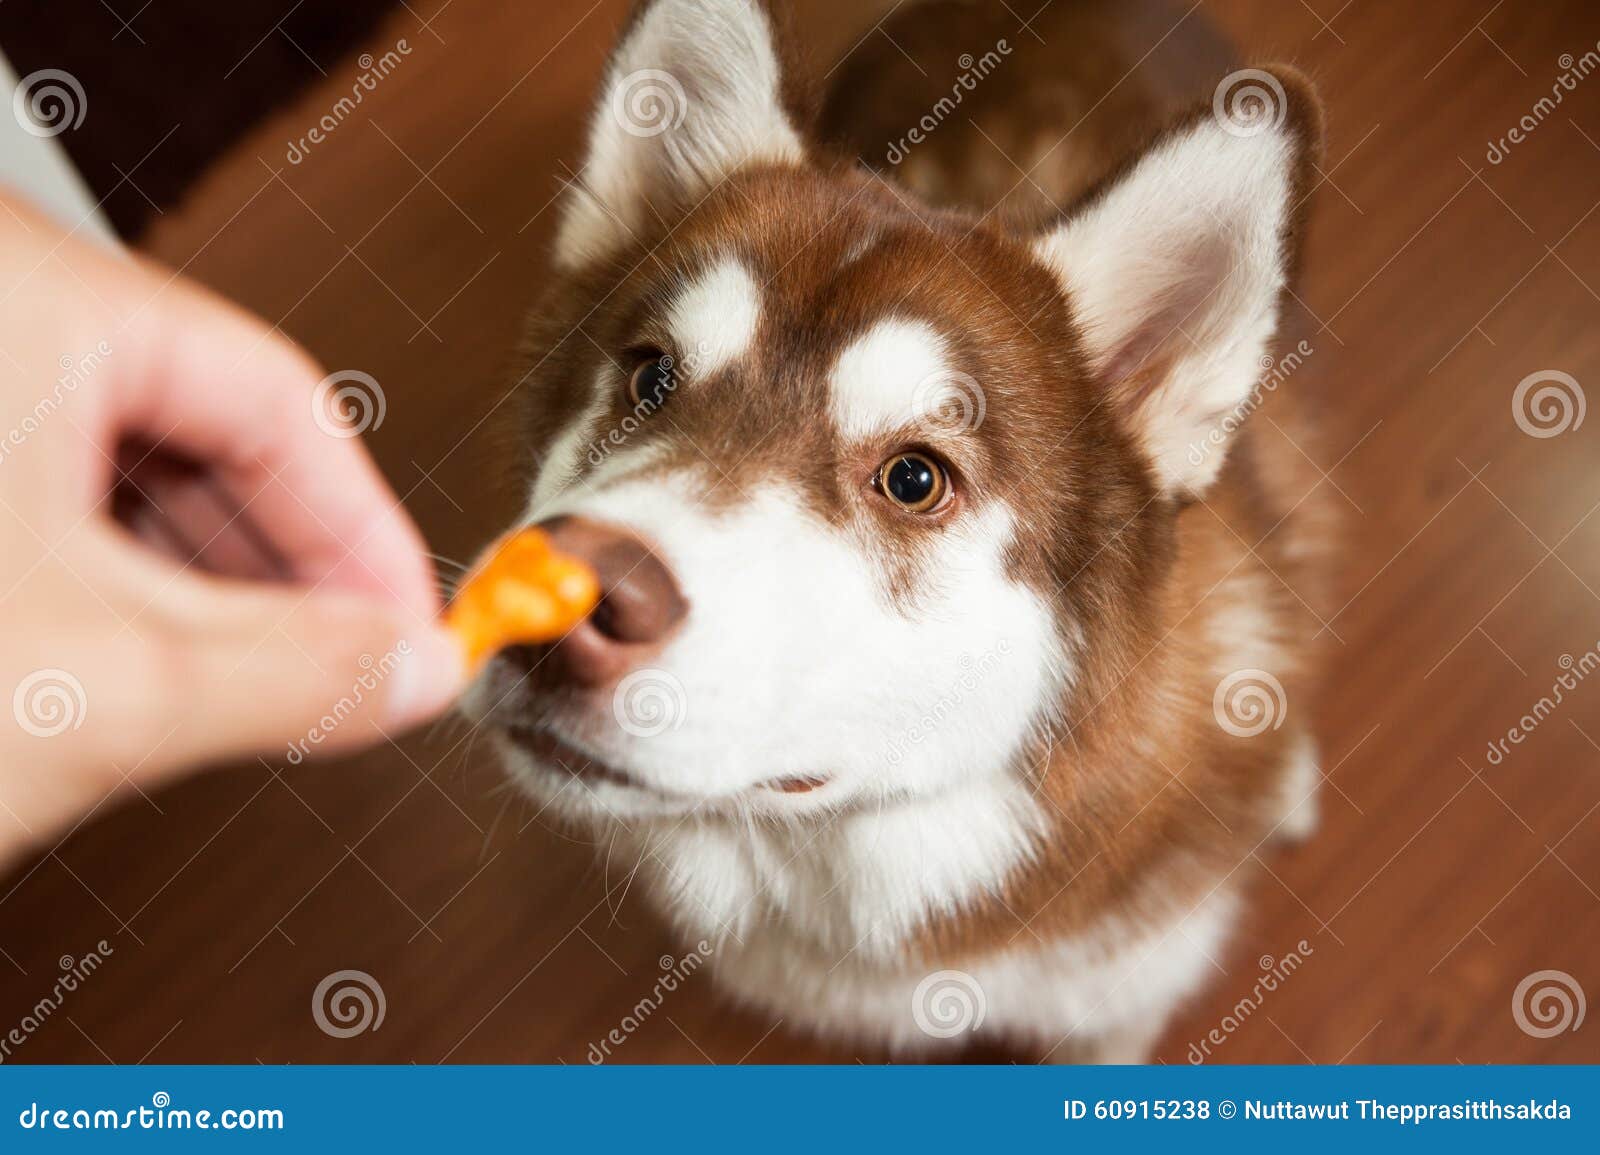 dog sniff the snack